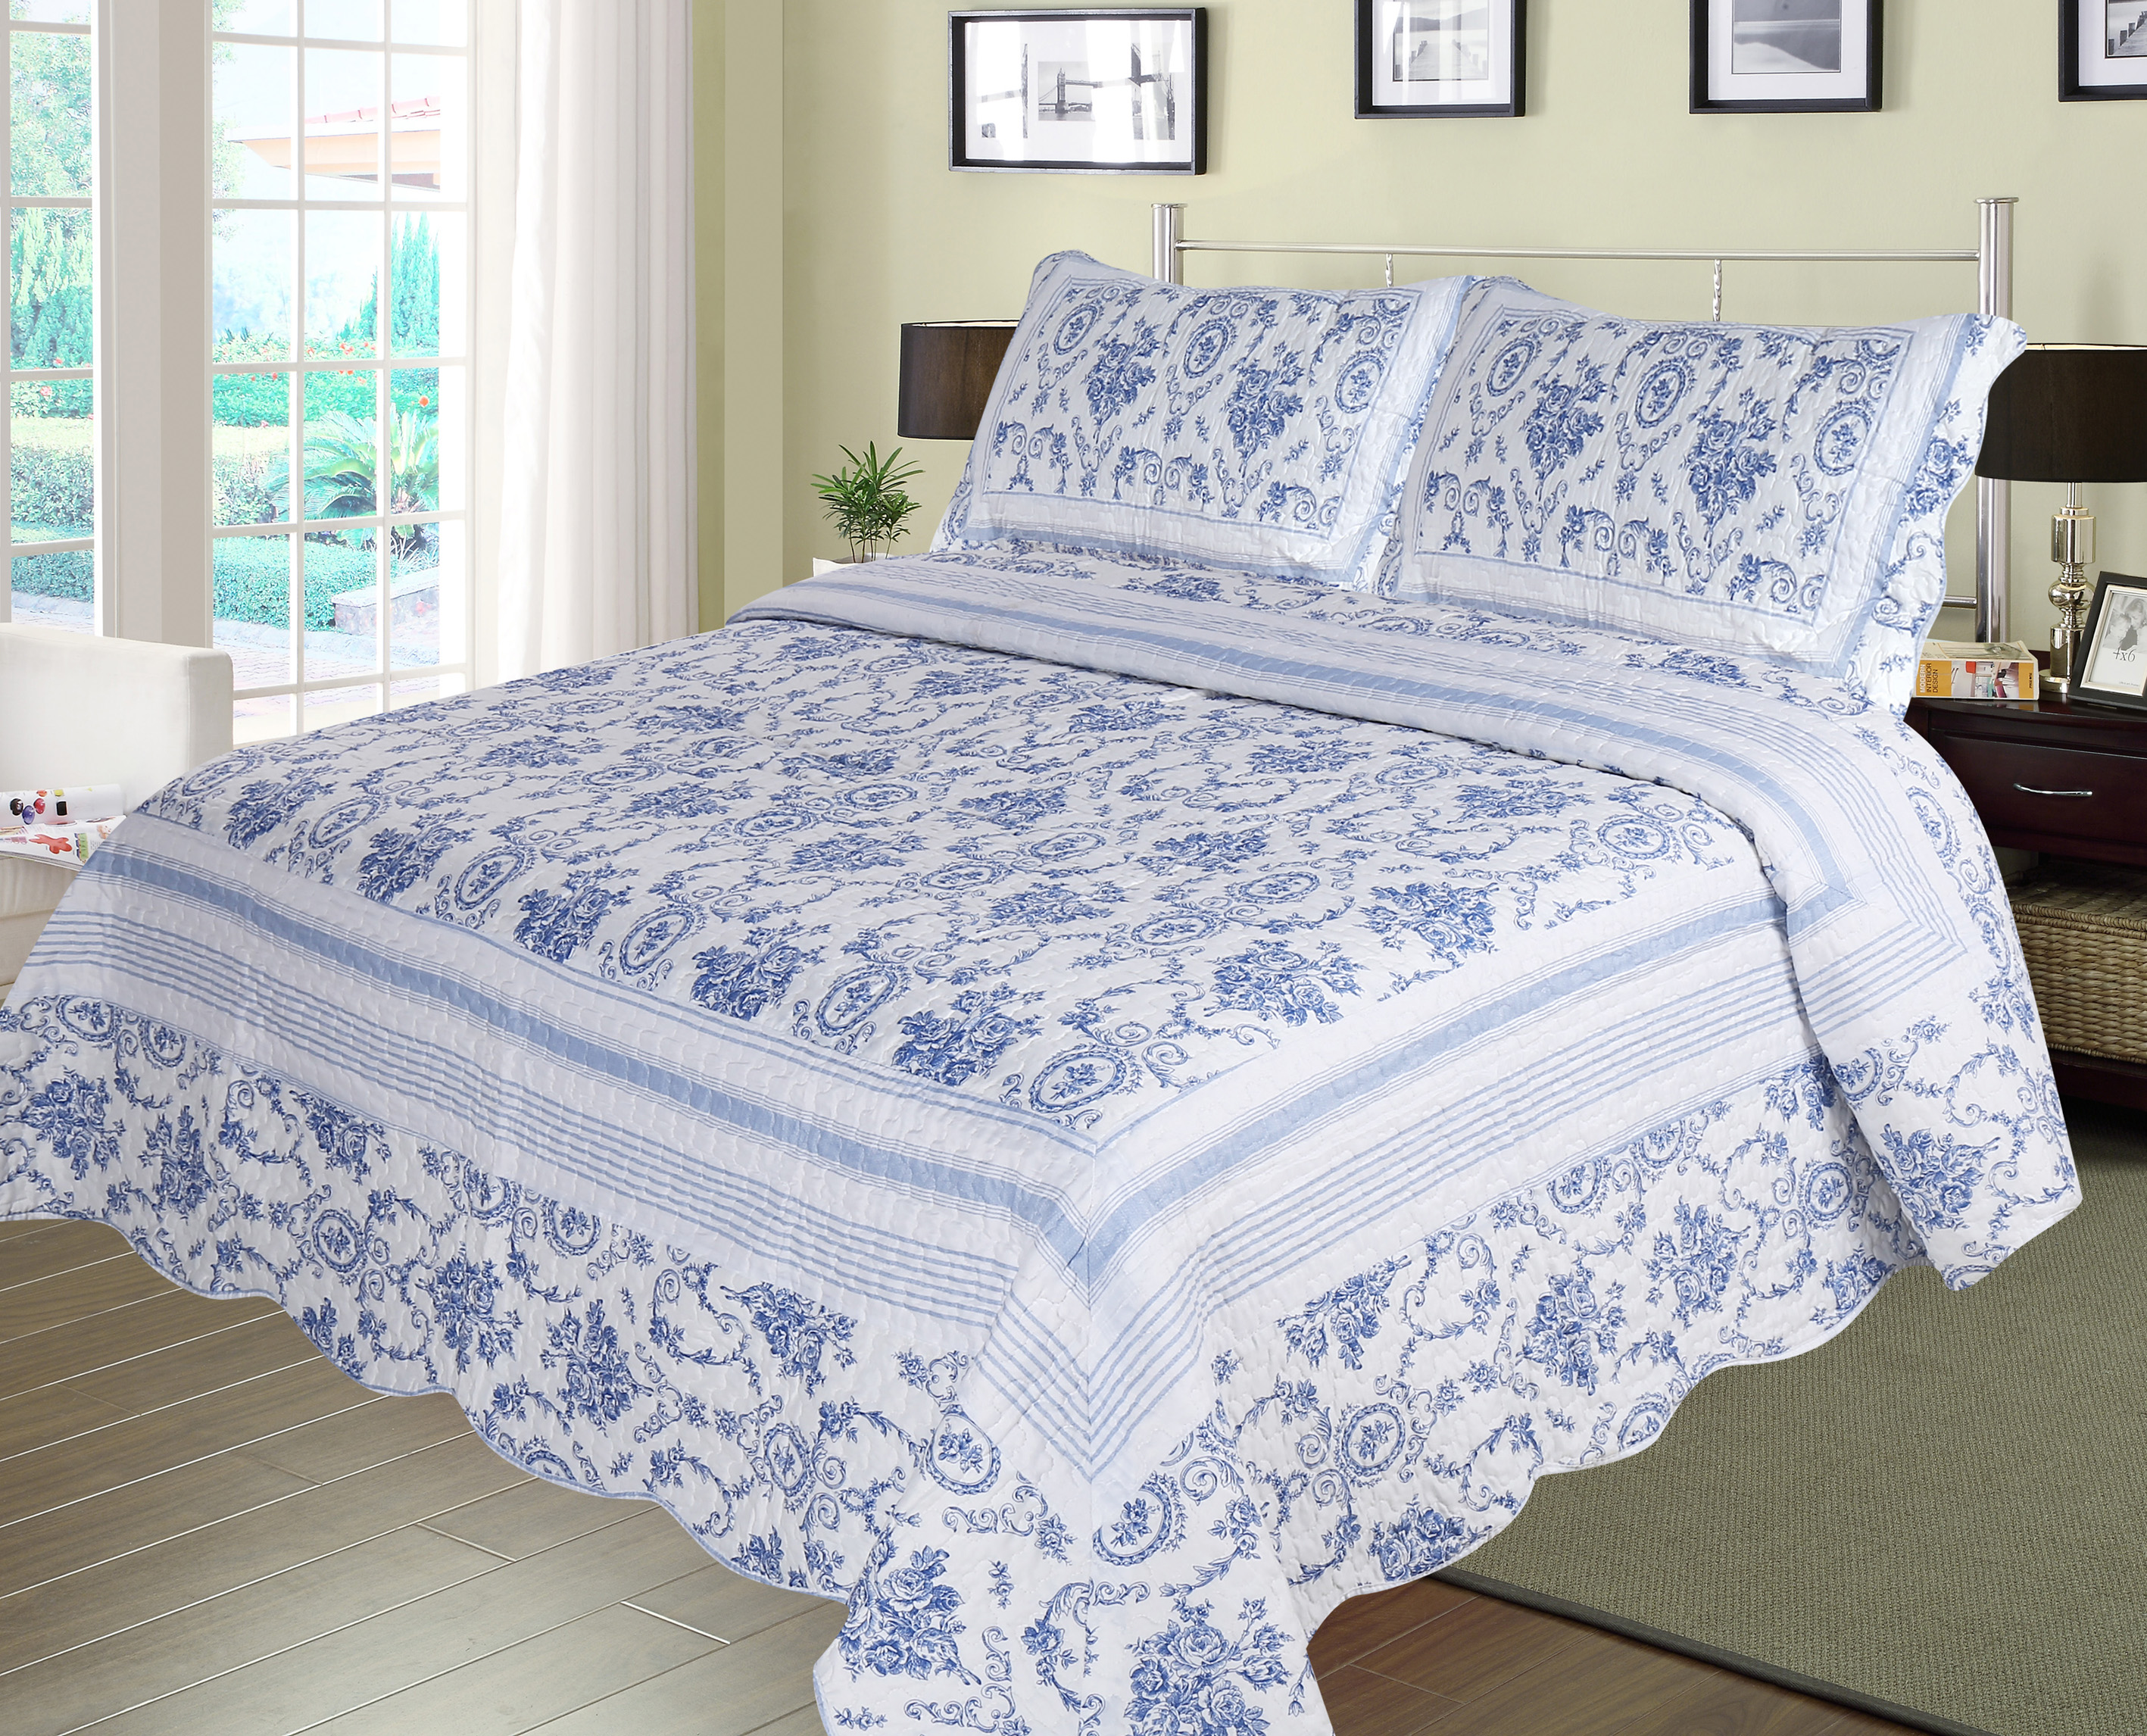 Blue Wisteria Lattice Combo - Buy a Super Queen with 2 Shams set and get a Twin Quilt Free!!!! Offer ends early